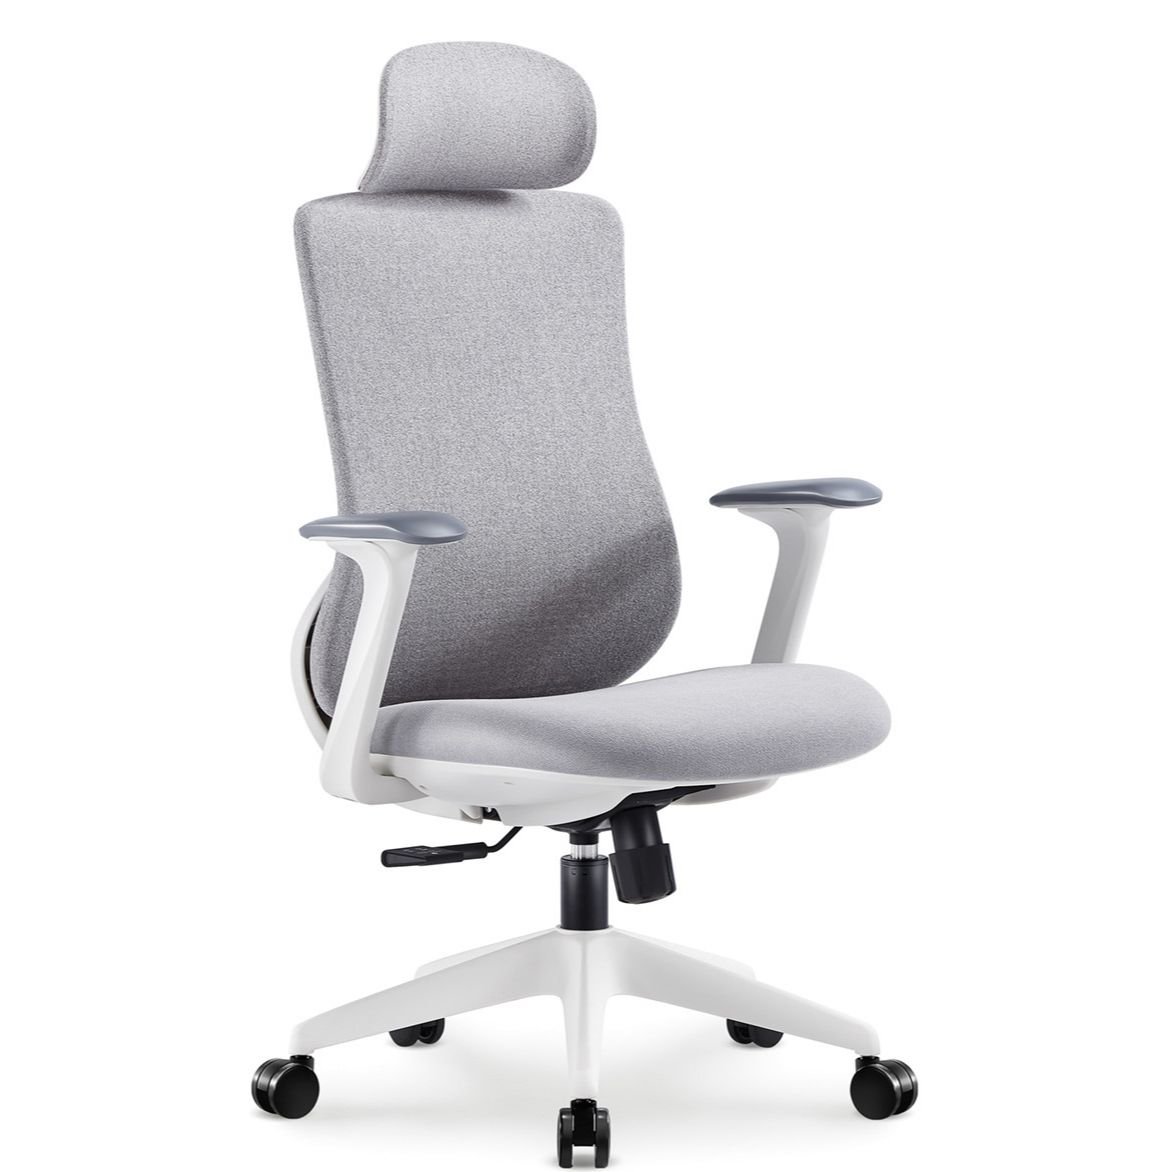 Ergonomic Lifting Swivel Dove Grey Upholstered Office Desk Chairs with Back, Headrest, Arms and Wheels, Grey